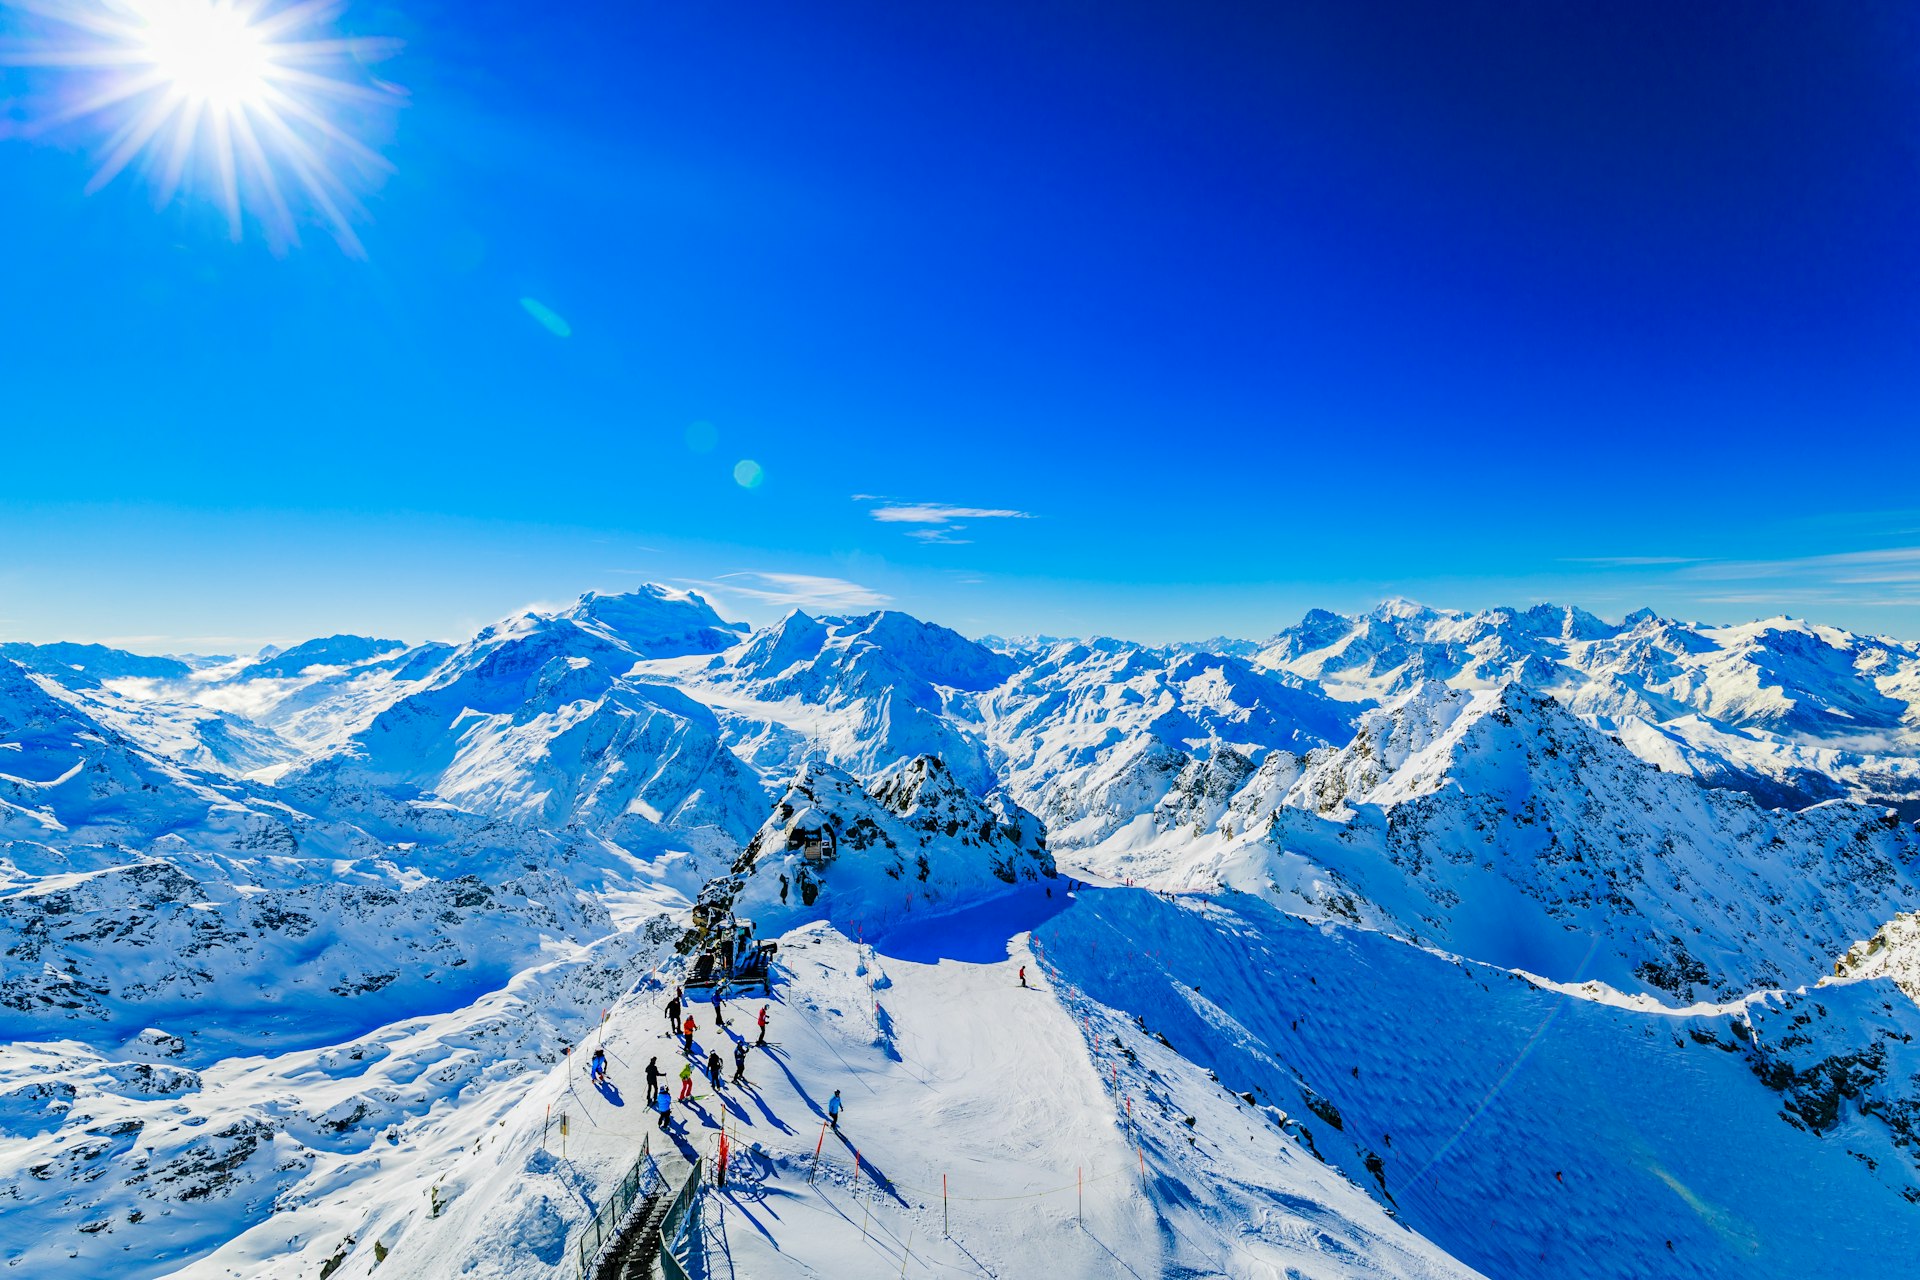 A picture of the mountaintops around Verbier